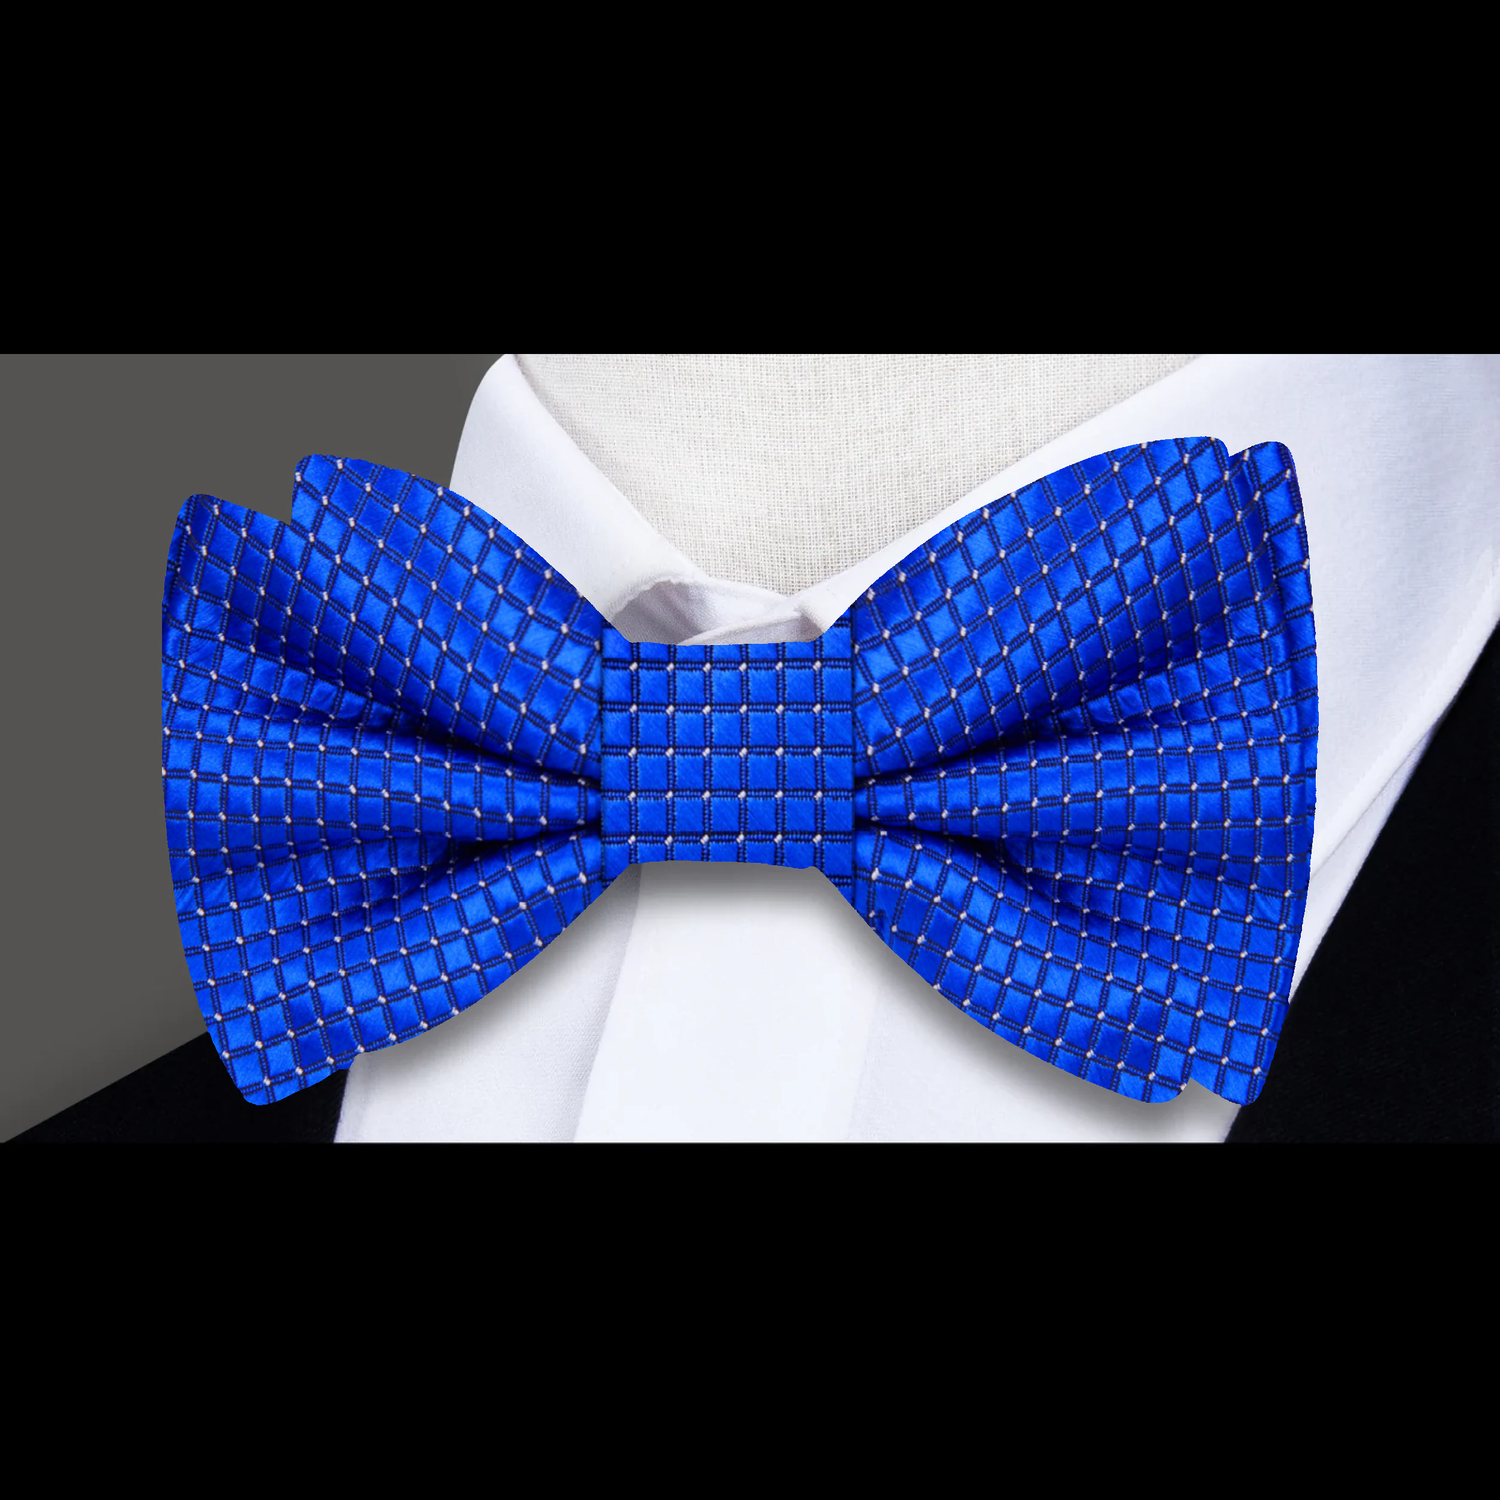 Blue with White Geometric Texture Bow Tie